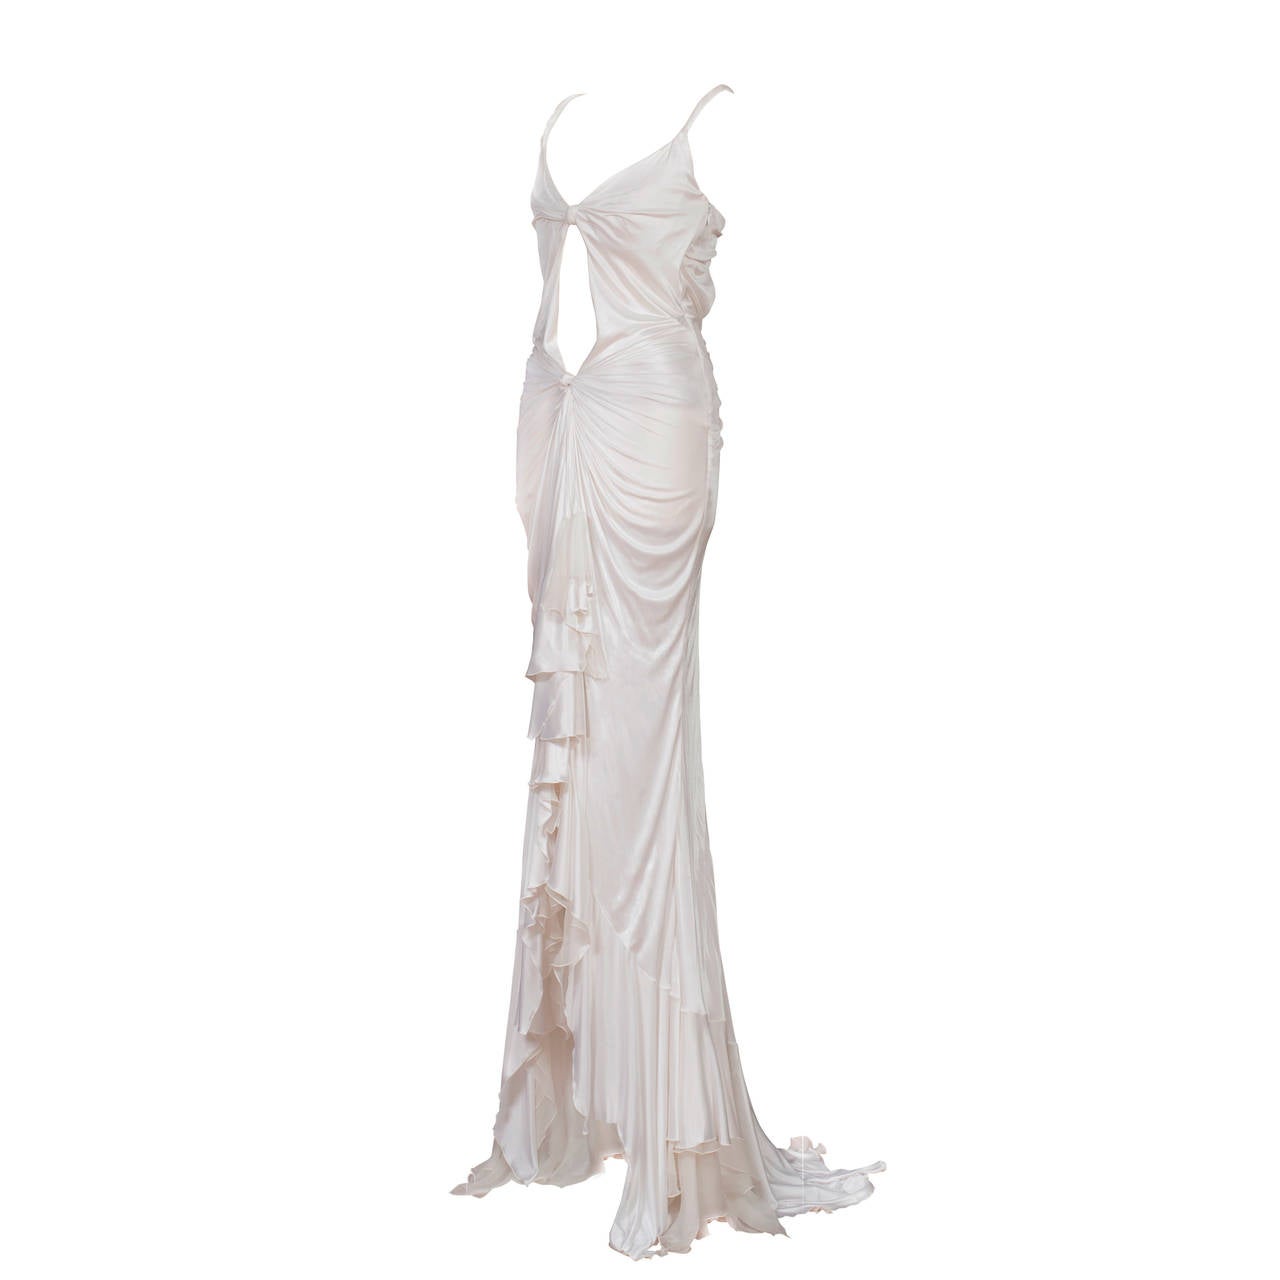 Versace white evening gown from 1990's. 
Elegant draping, knits and twists details with open back ensure a stunning silhouette. Soft off white colour, mermaid design and artfully embellished fit. 
Size : 42 Italian ( 38 EU, US 6-8 )
Measurements